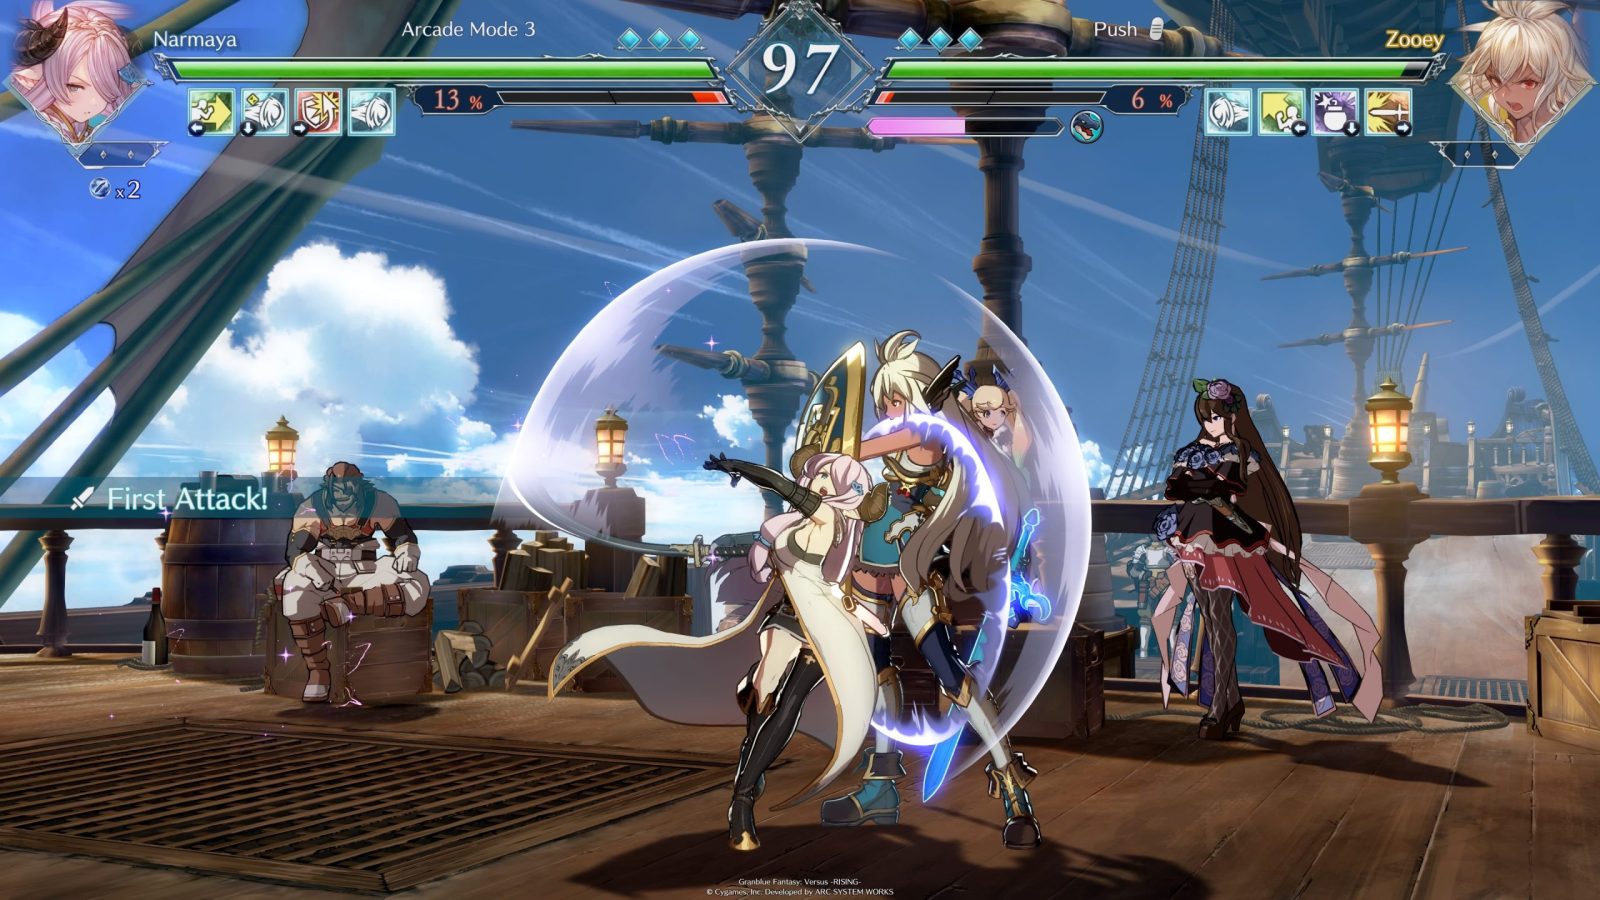 Granblue Fantasy Versus: Rising Review - A Shiny New Coat On A Familiar  Fighter